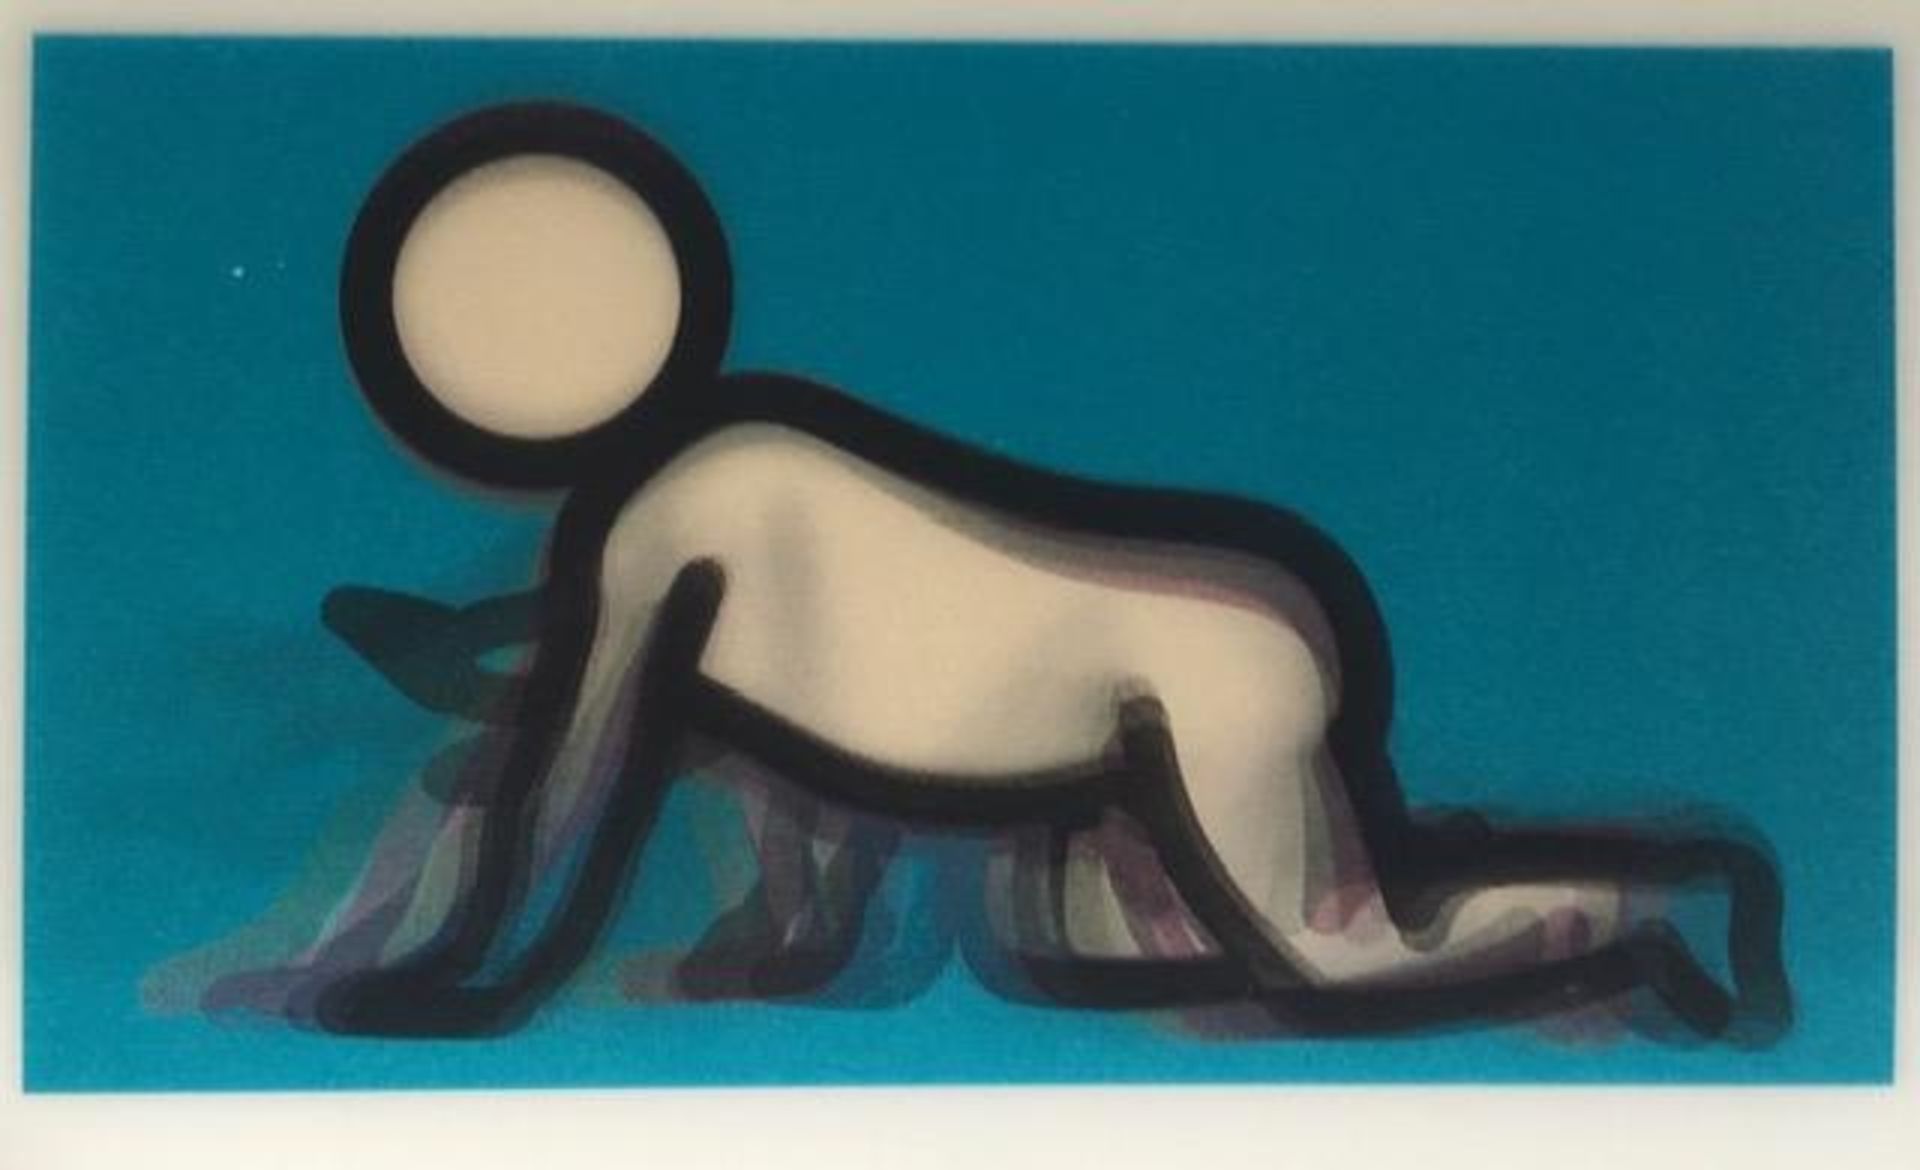 Julian Opie (1958-) 3D Lenticular Moving Image, in Colours ‘DINO CRAWLING’ Framed, 2012 - Image 4 of 13